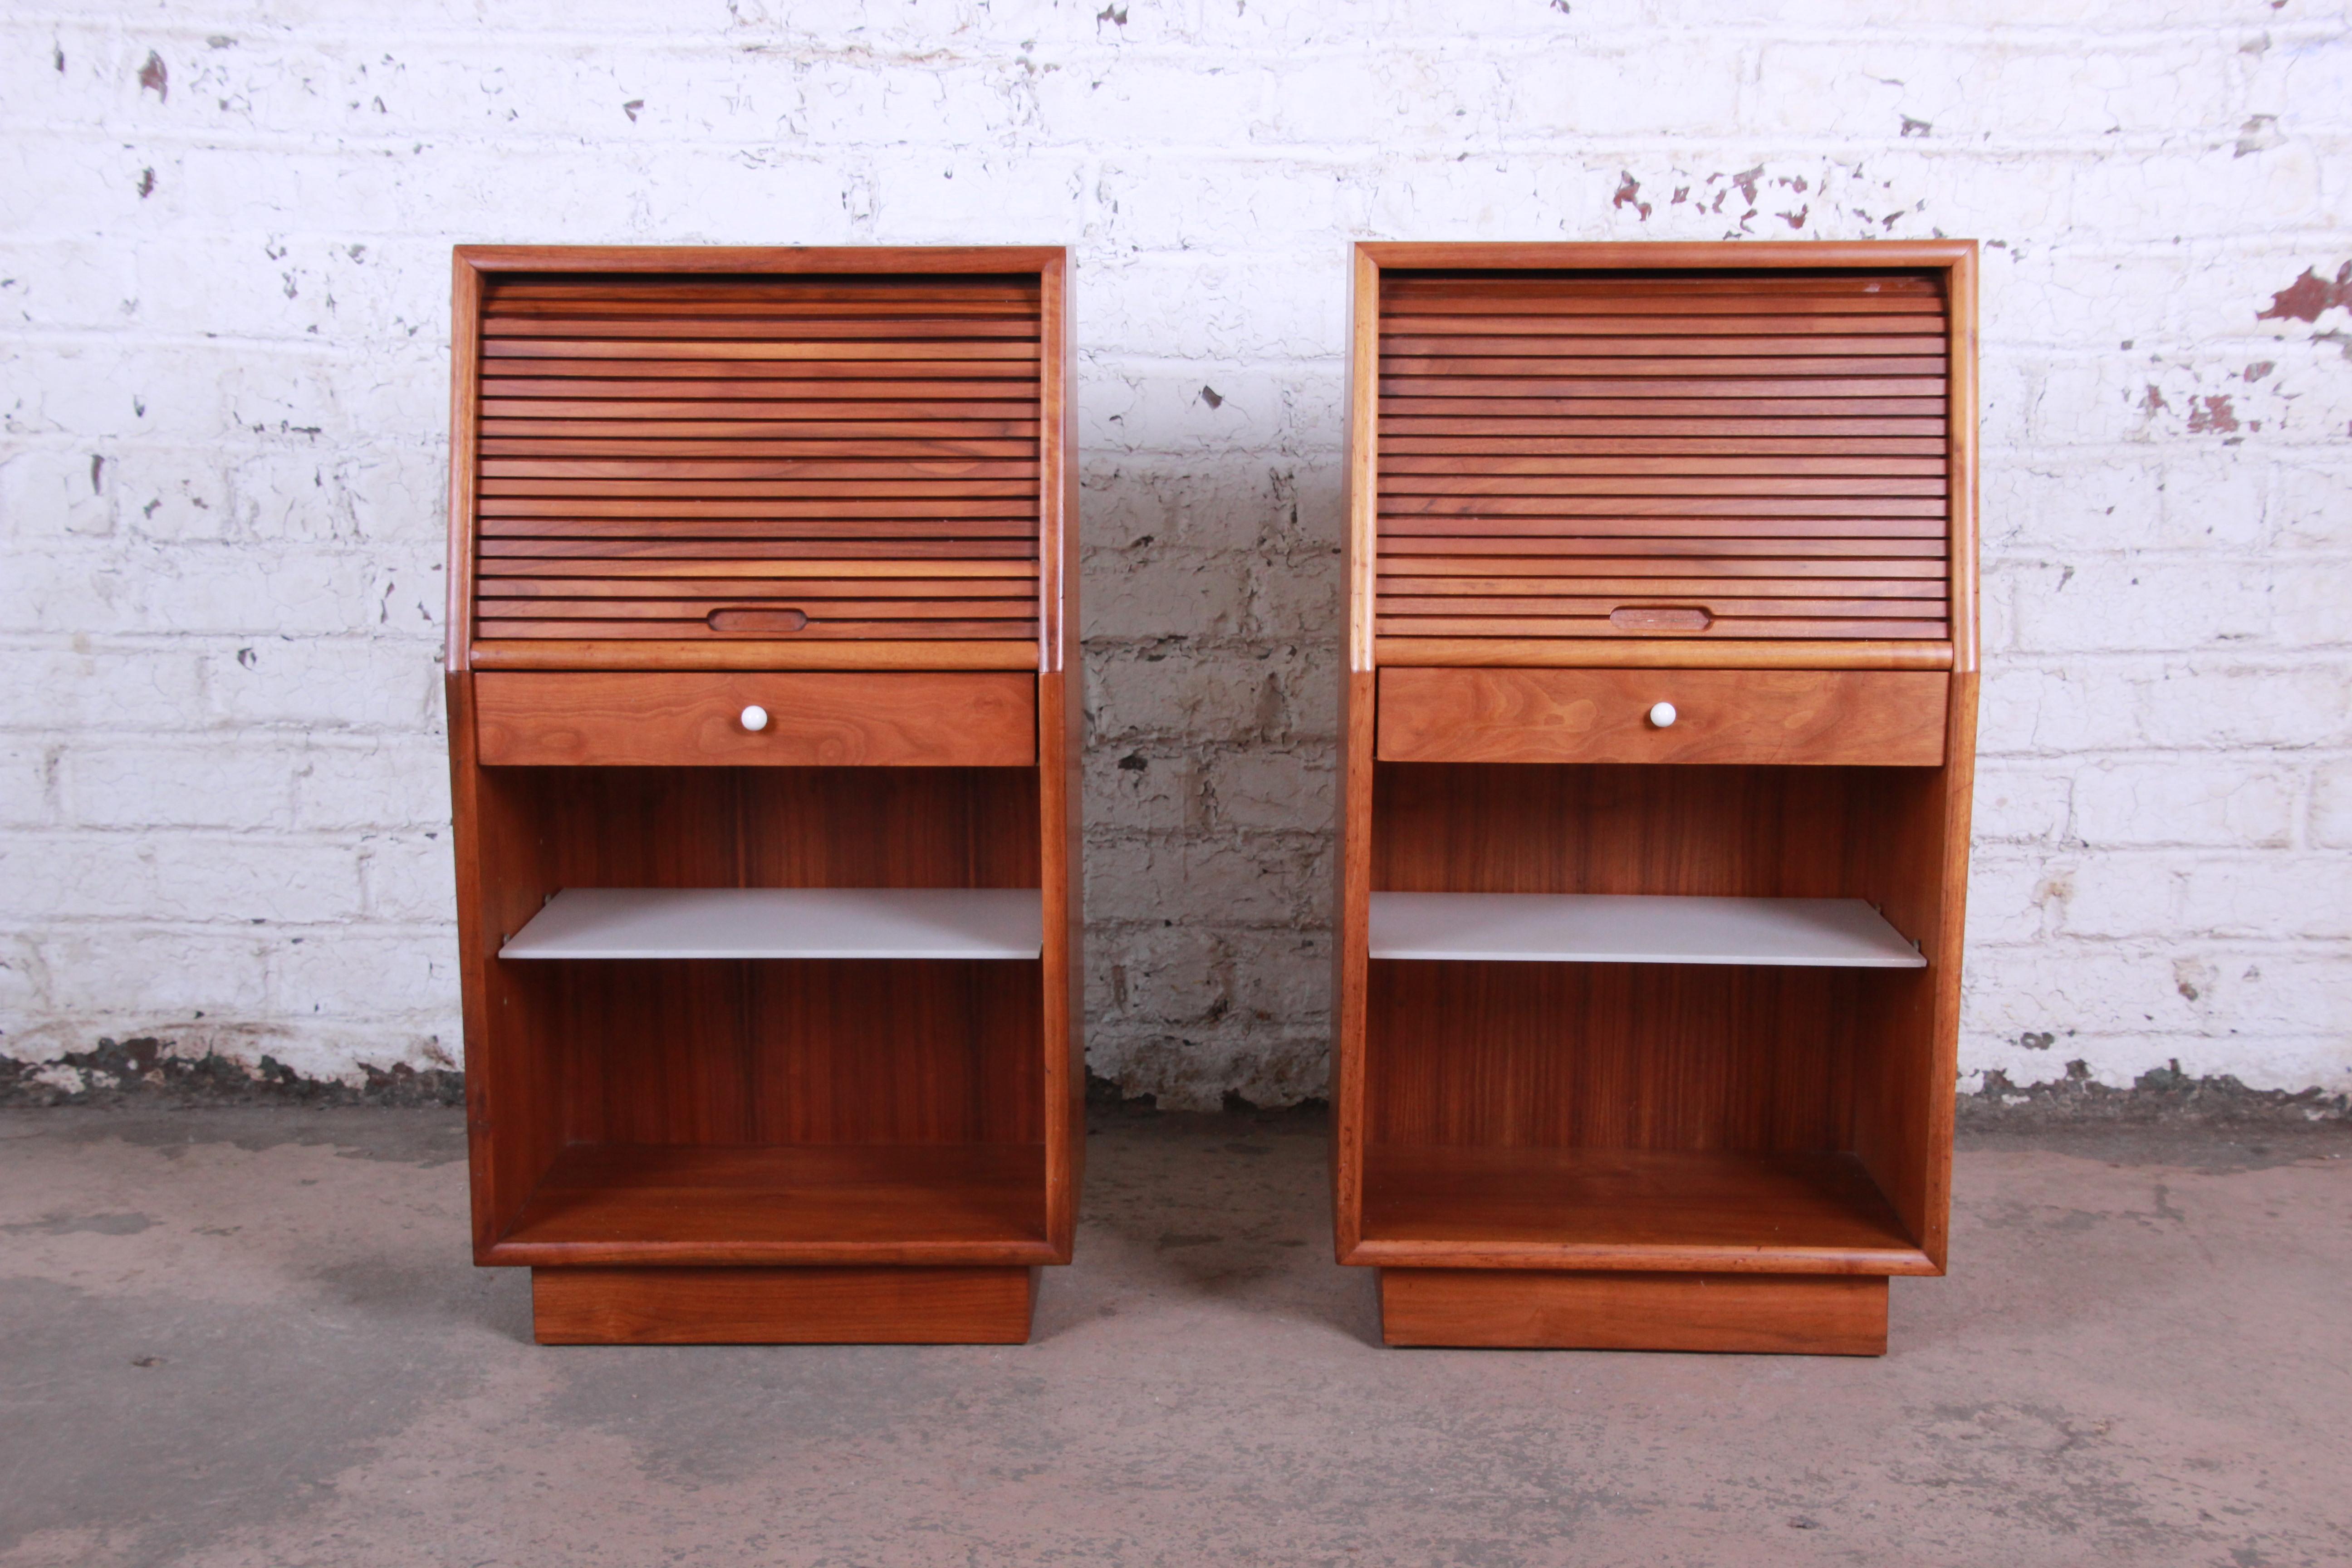 An excellent pair of Mid-Century Modern walnut tambour door nightstands designed by Kipp Stewart for Drexel Declaration. The nightstands feature gorgeous walnut wood grain and sleek midcentury design. They offer good storage, each with an open